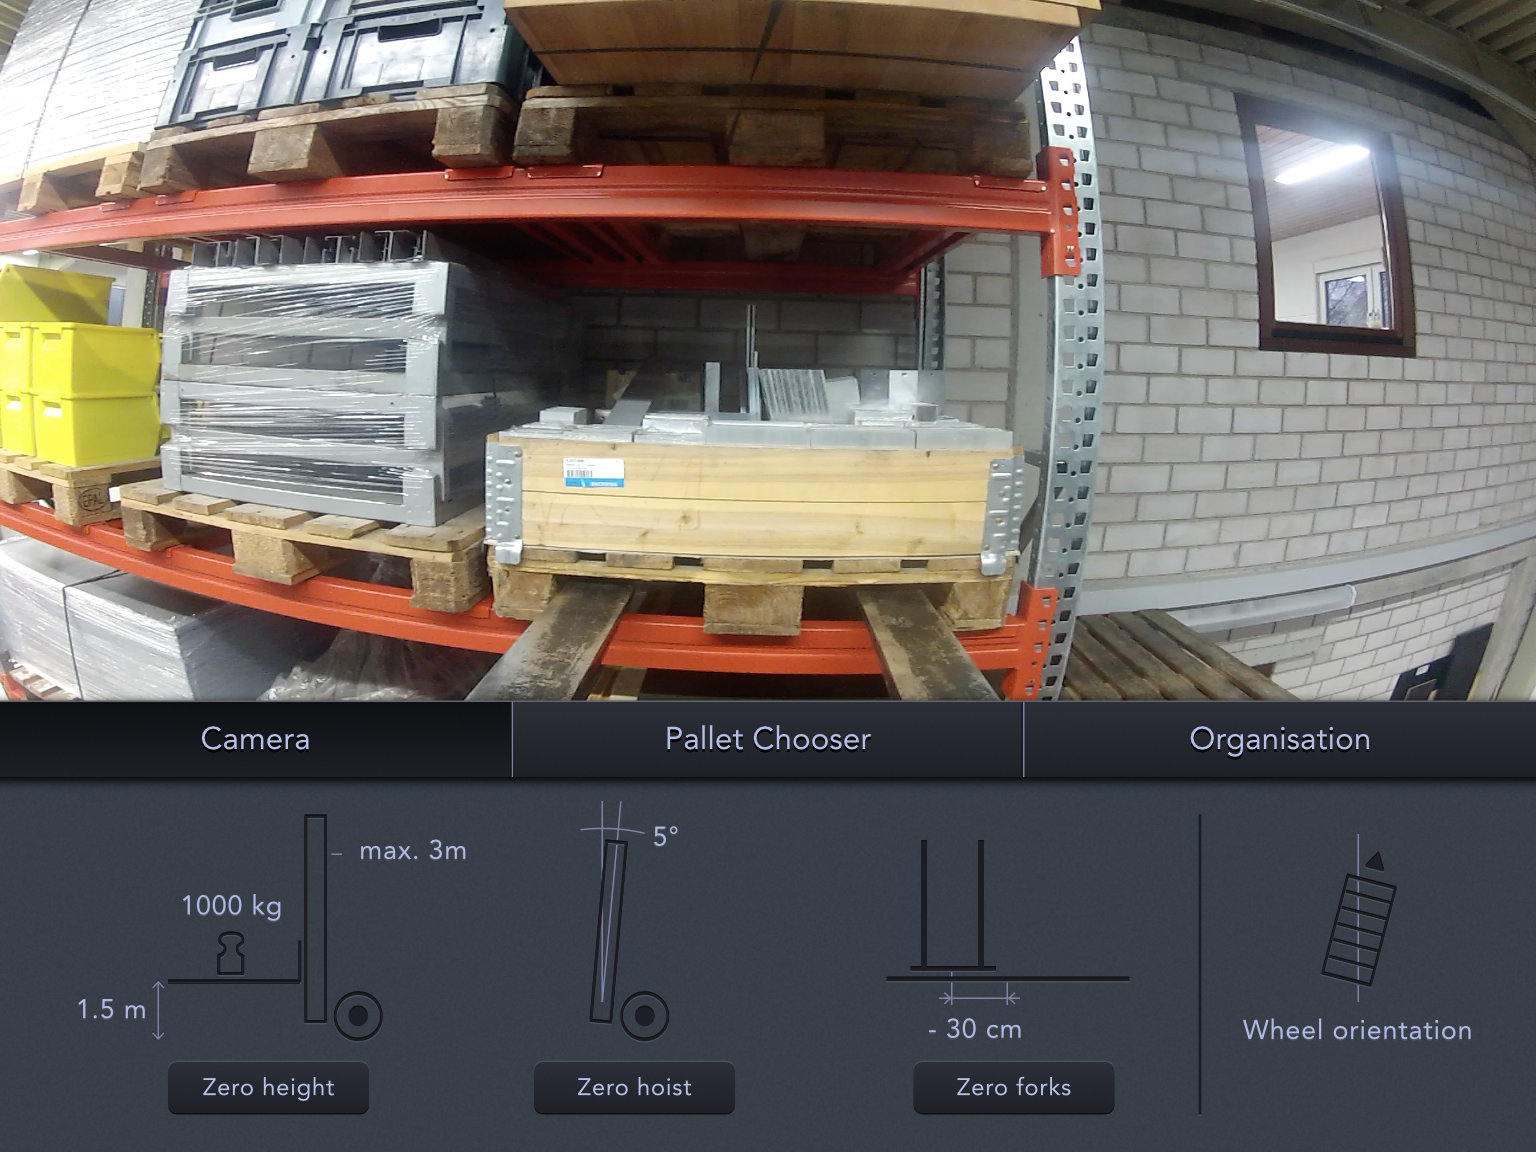 Camera view interface, with live camera image at the top and visualizations of forklift data at the bottom.